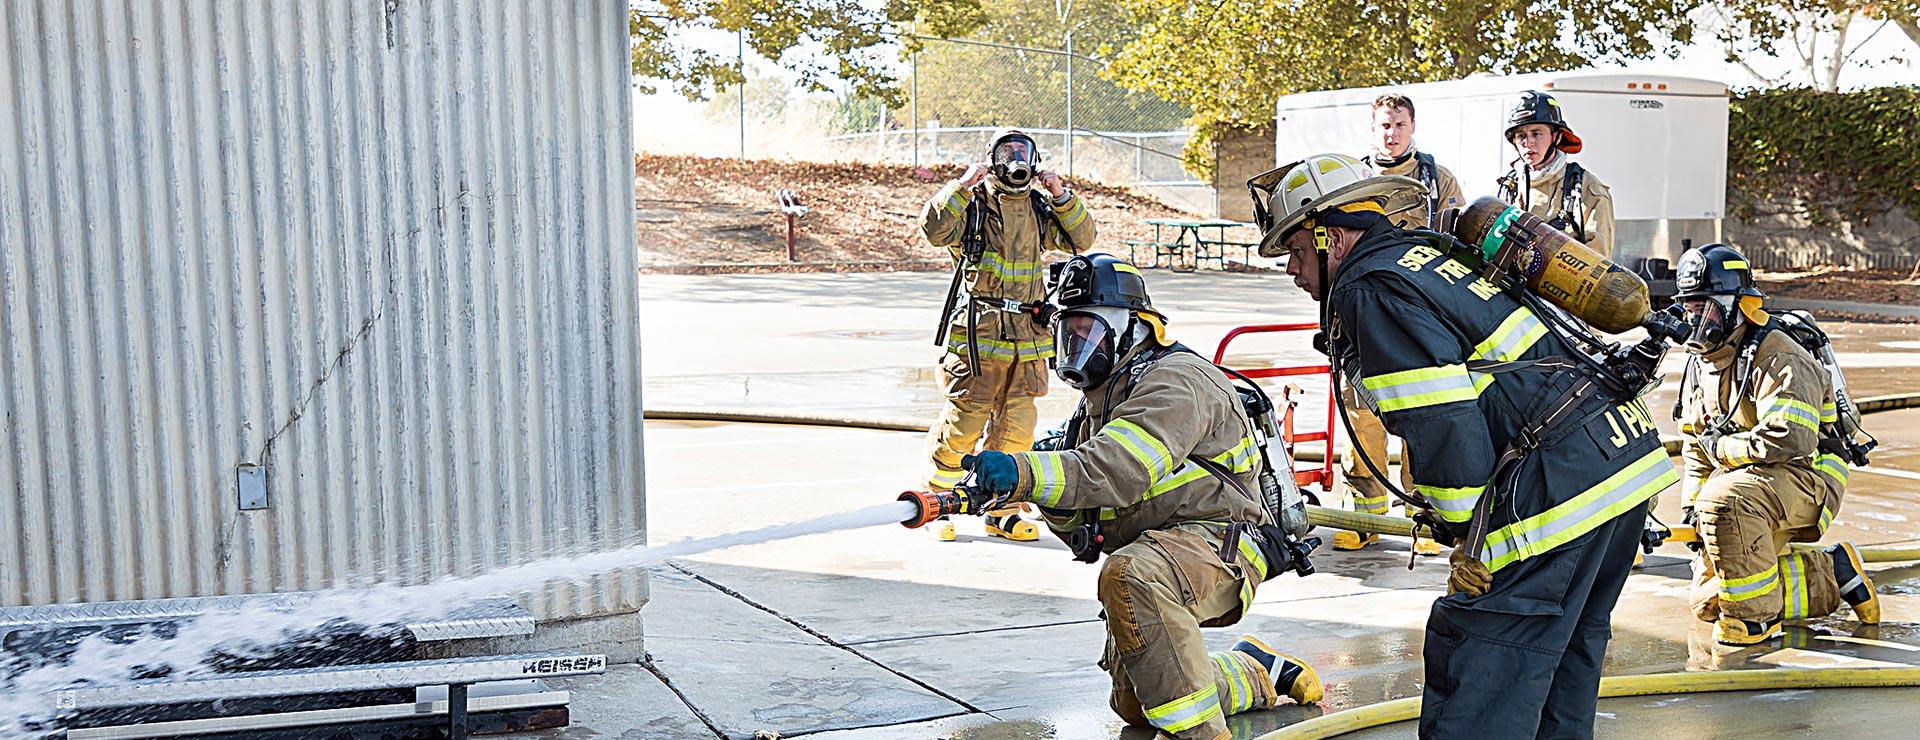 Firefighting student practices using fire hose as instructor and students observe